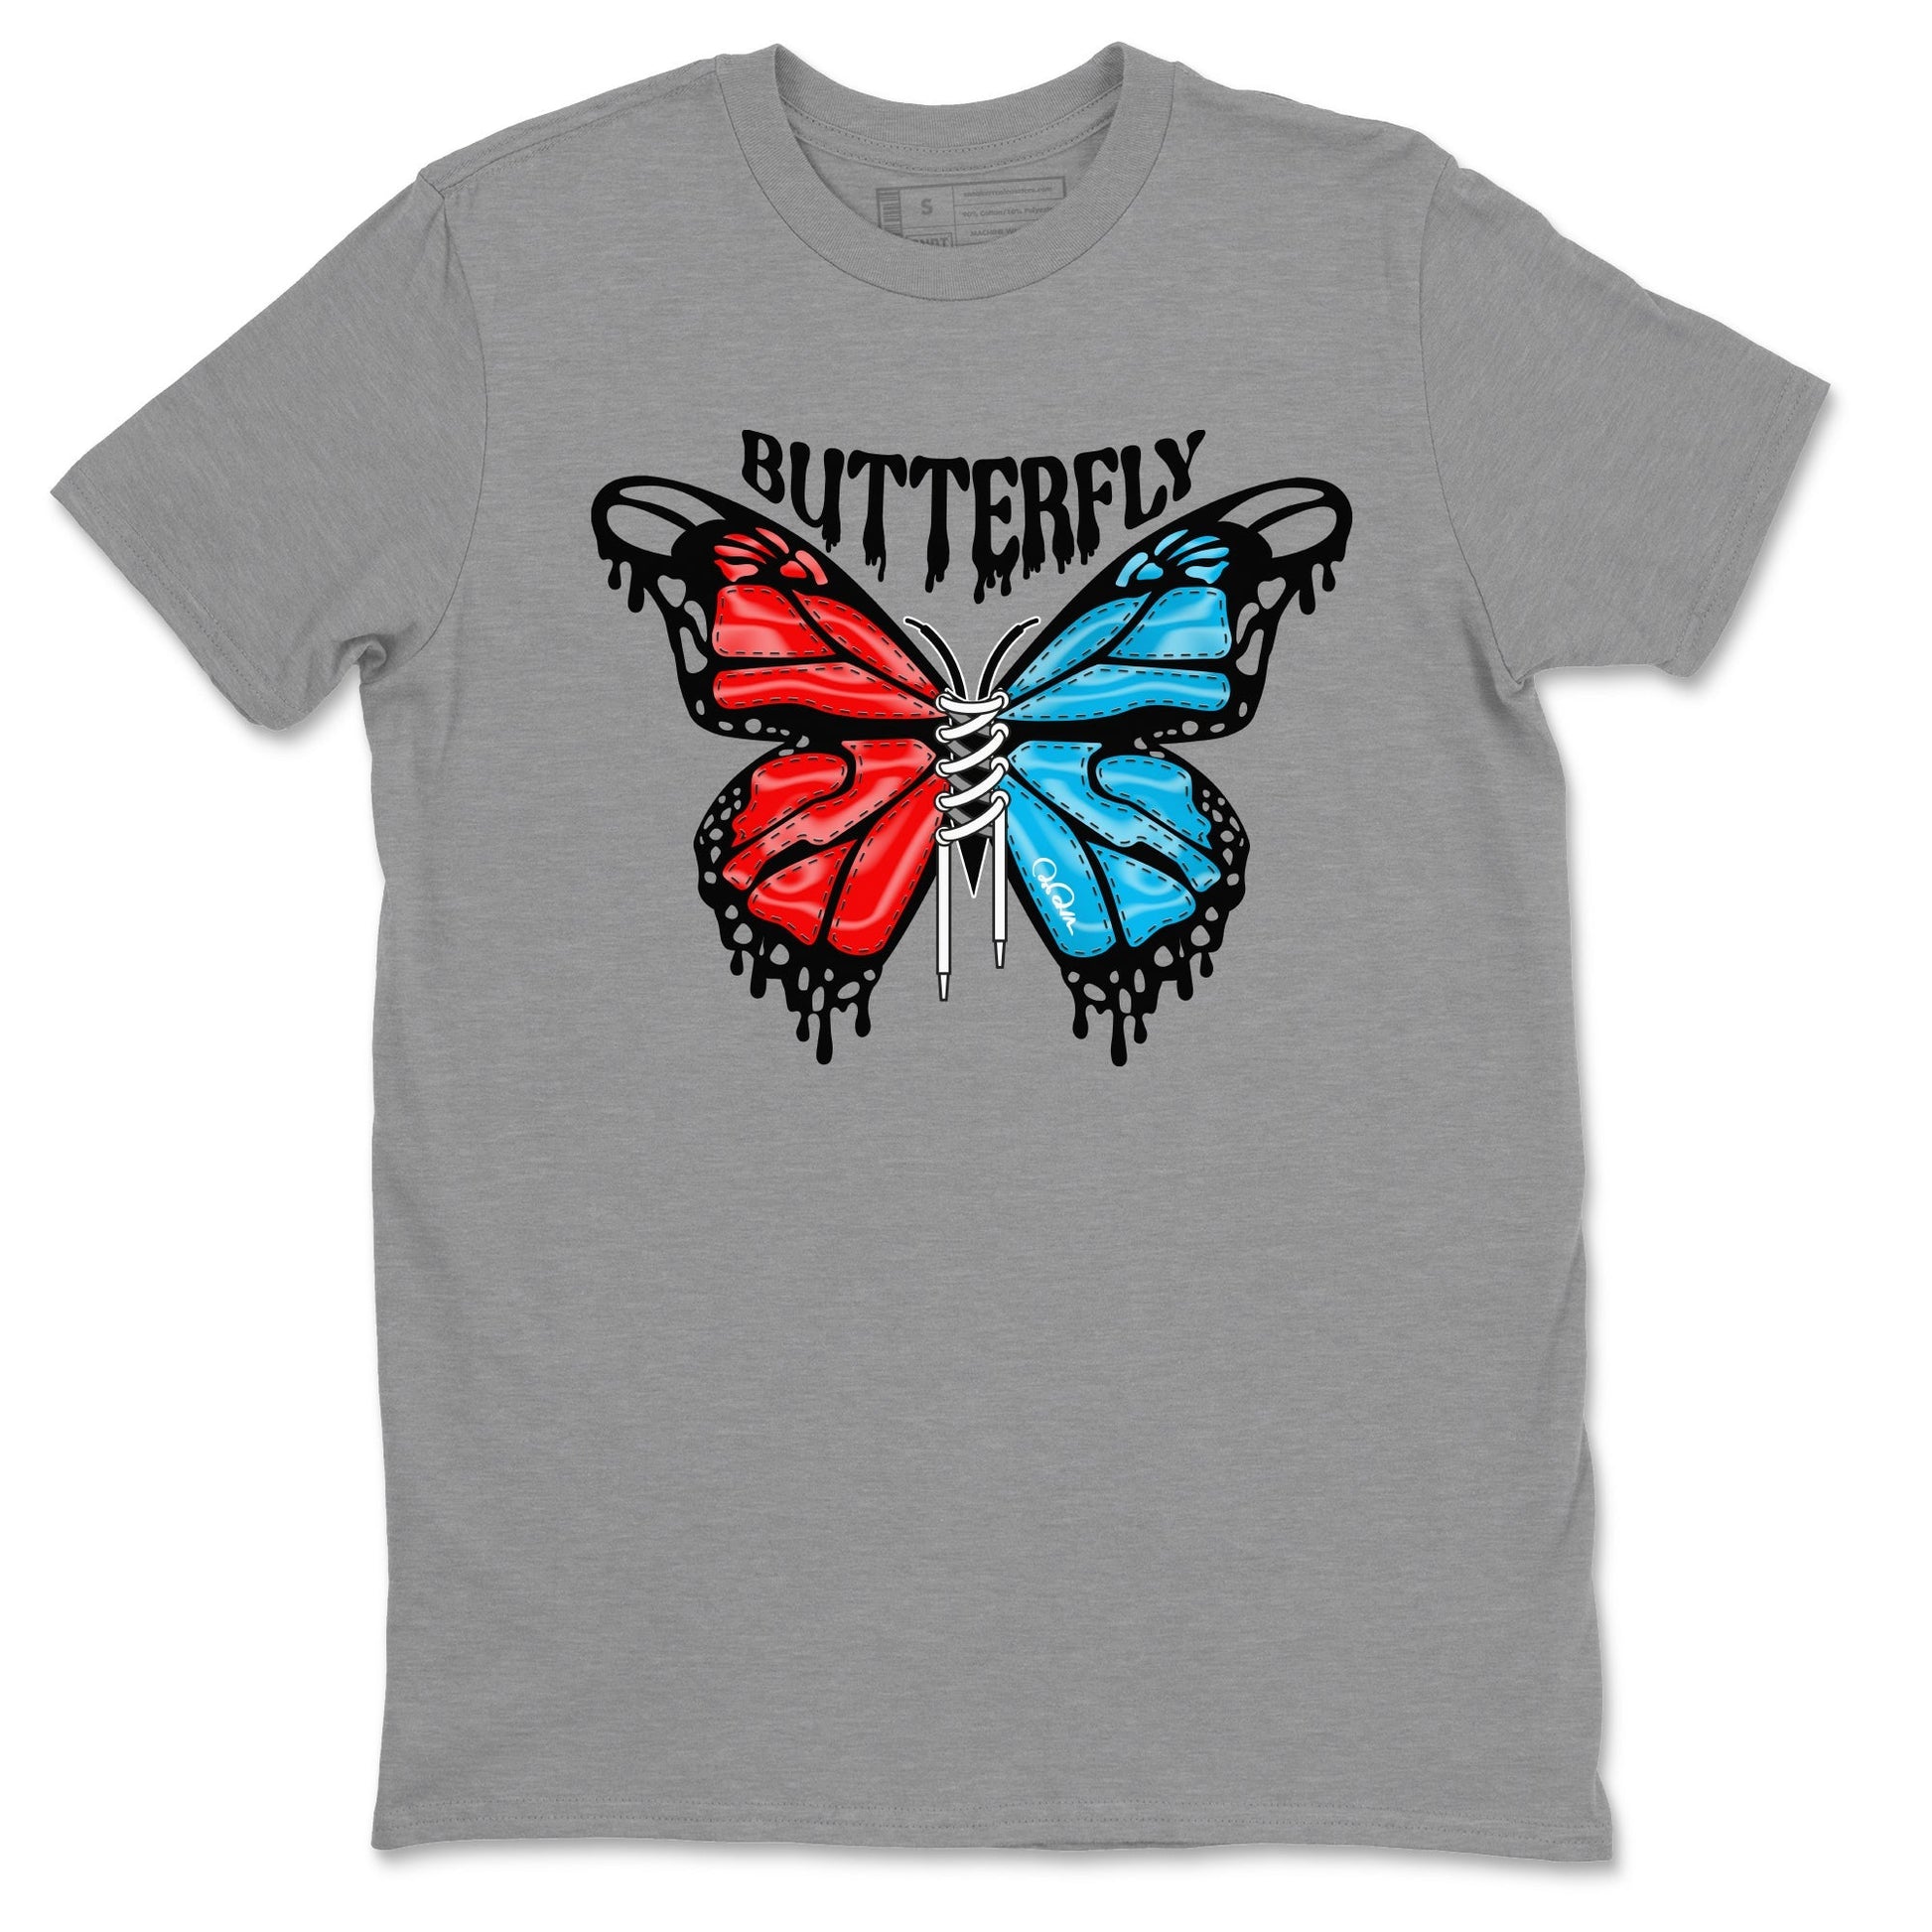 Air Jordan 1 UNC to Chicago Sneaker Match Tees Butterfly Streetwear Sneaker Shirt AJ1 UNC to Chicago Sneaker Release Tees Unisex Shirts Heather Grey 2